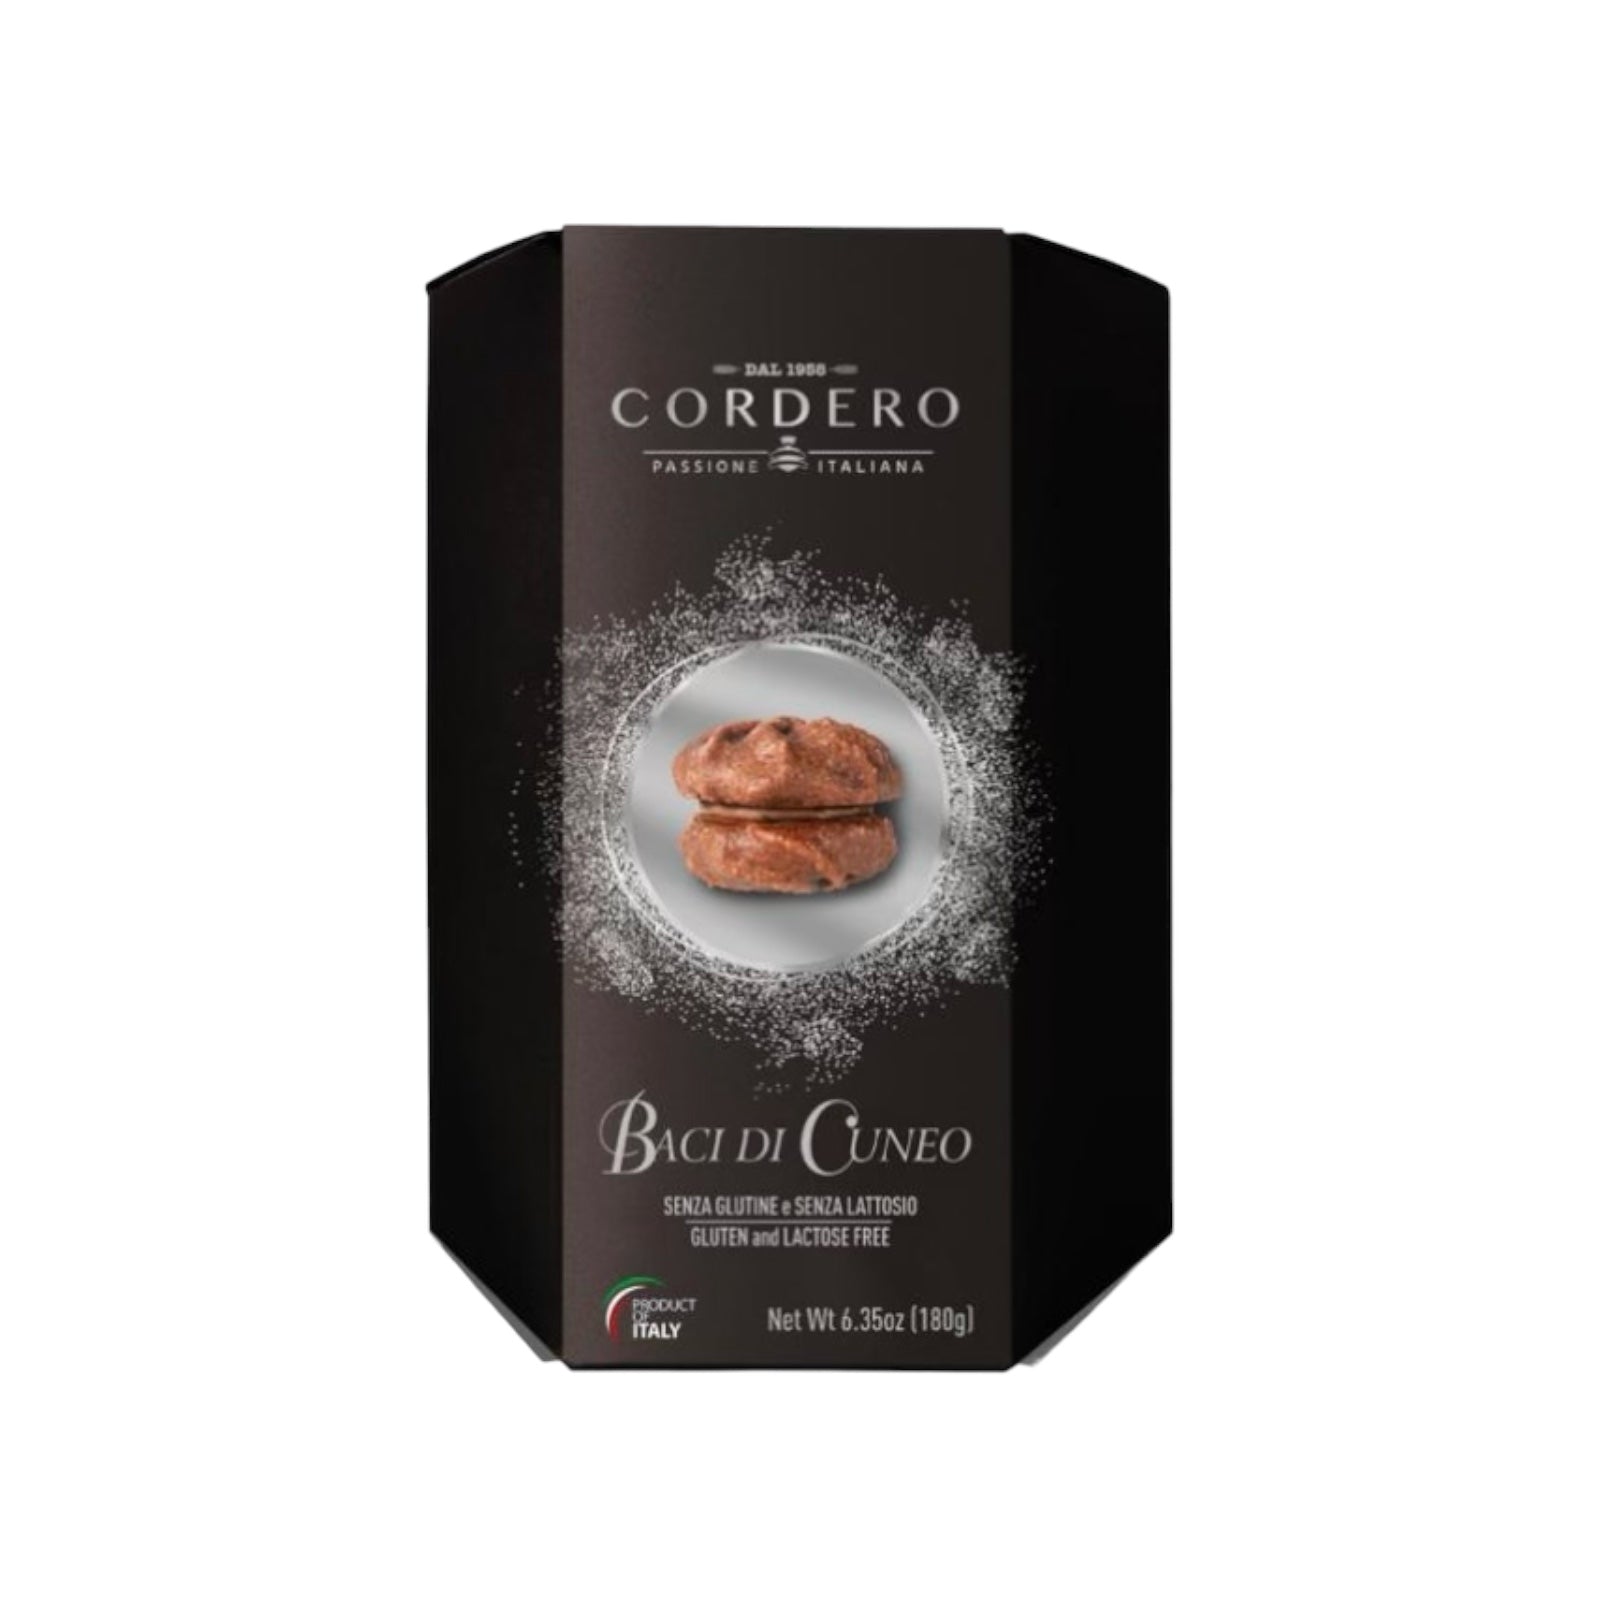 BEST BEFORE JAN/31/24 Gluten Free Soft Biscuits Filled With Cocoa & Hazelnut 6.35oz By Cordero